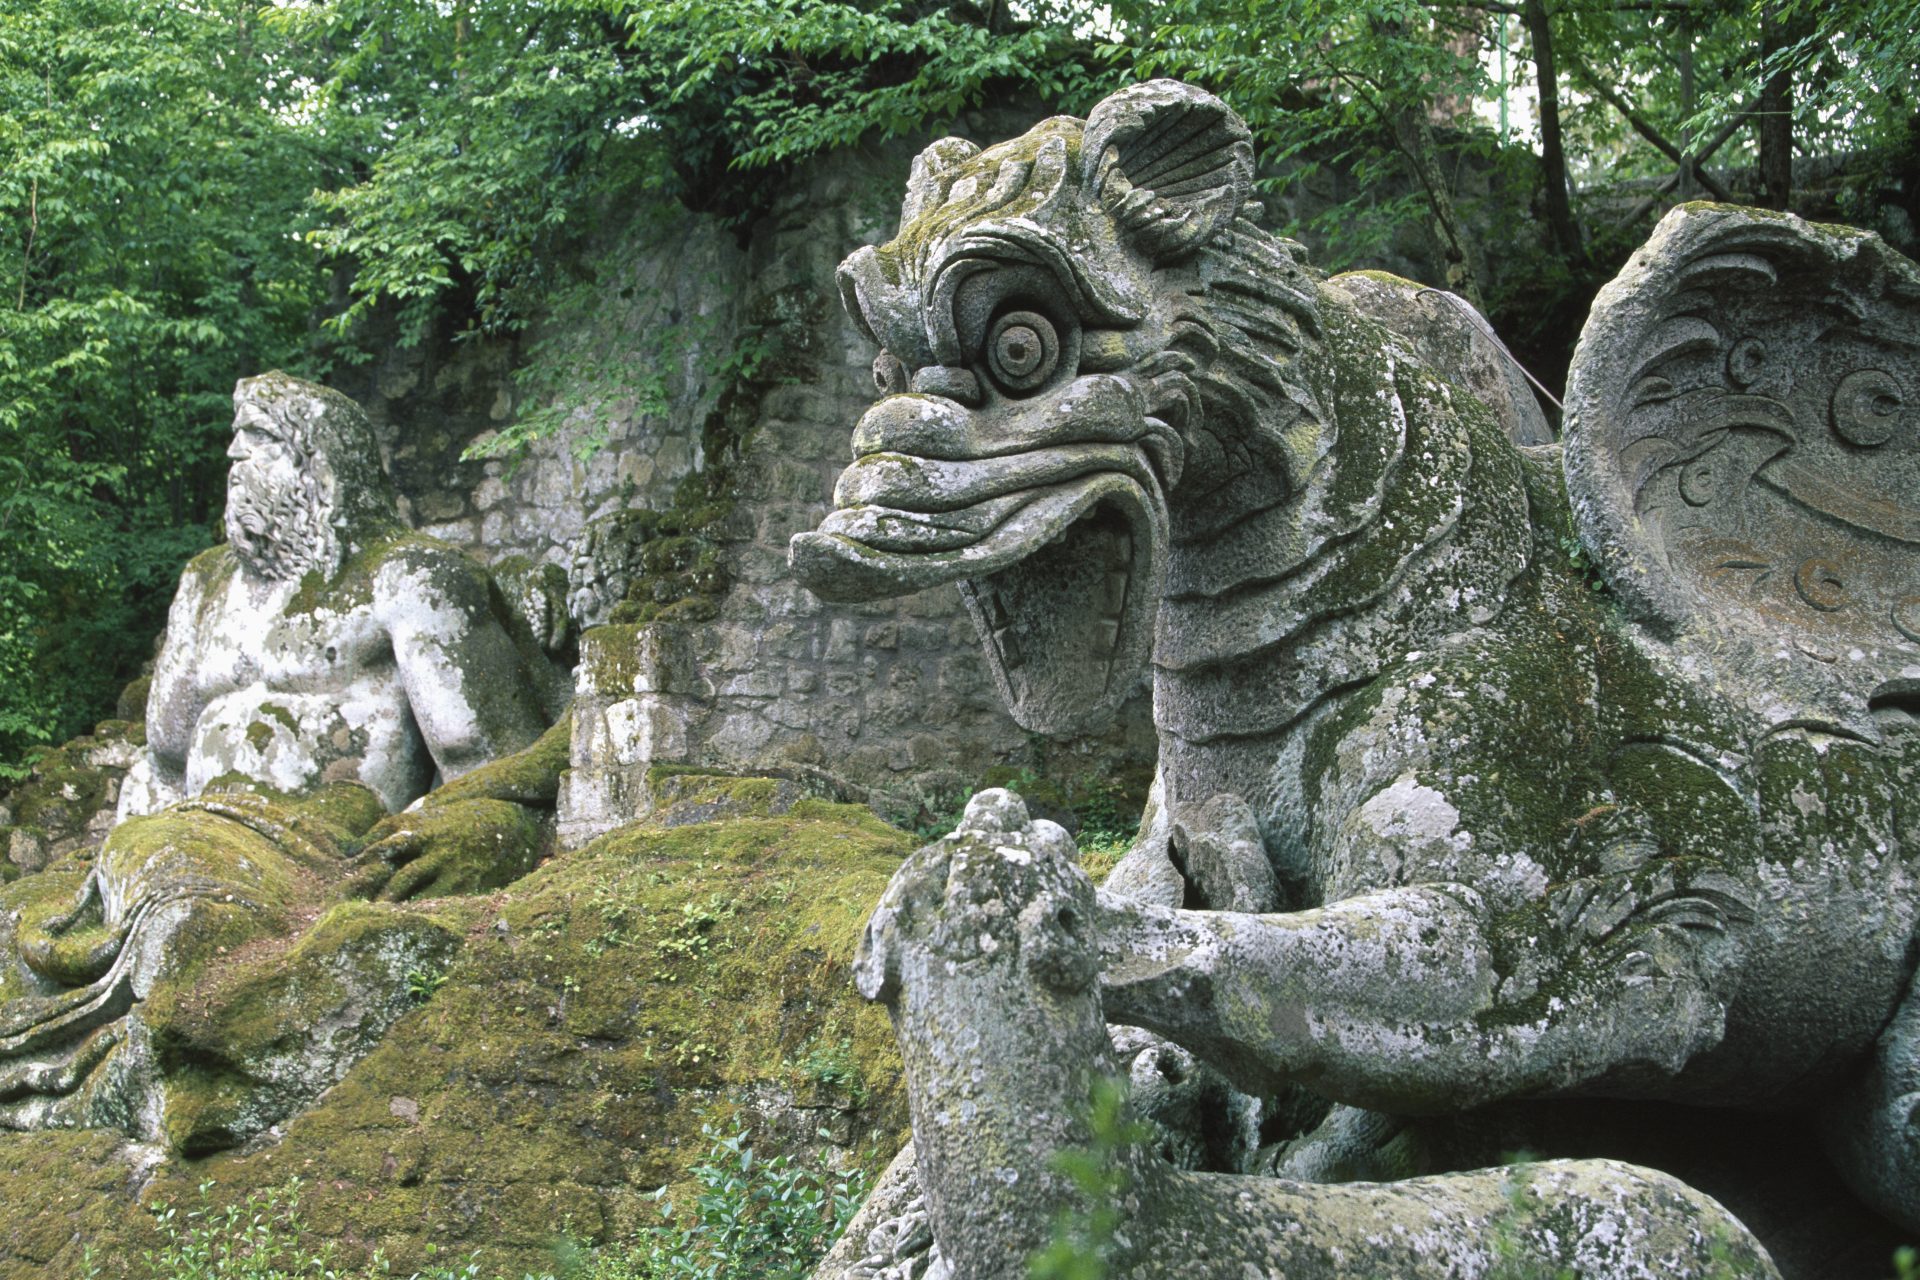 <p>The town of Bomarzo owes its fame mainly to its Parco Dei Mostri, created in 1547 at the behest of Prince Pier Francesco Orsini. Dominated by enigmatic mythological statues, alchemy symbols, and monsters of all kinds, this park is the object of study by philologists, scientists, and historians to this day. They continue trying to decipher the mysteries of this enchanted forest.</p>